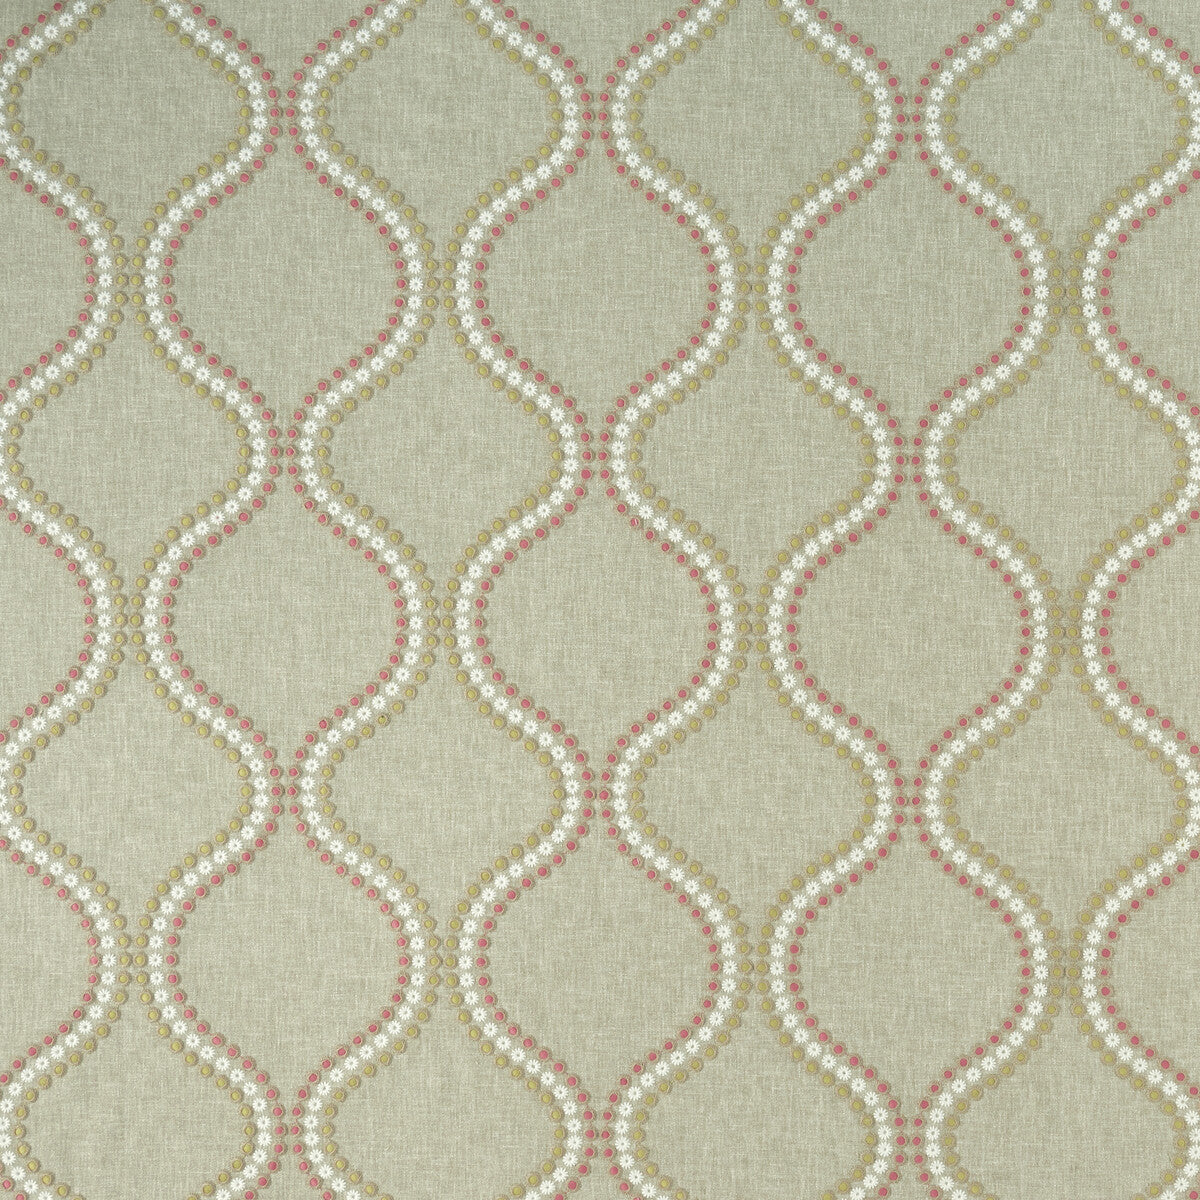 Layton fabric in pink/apple color - pattern F1006/05.CAC.0 - by Clarke And Clarke in the Clarke &amp; Clarke Halcyon collection